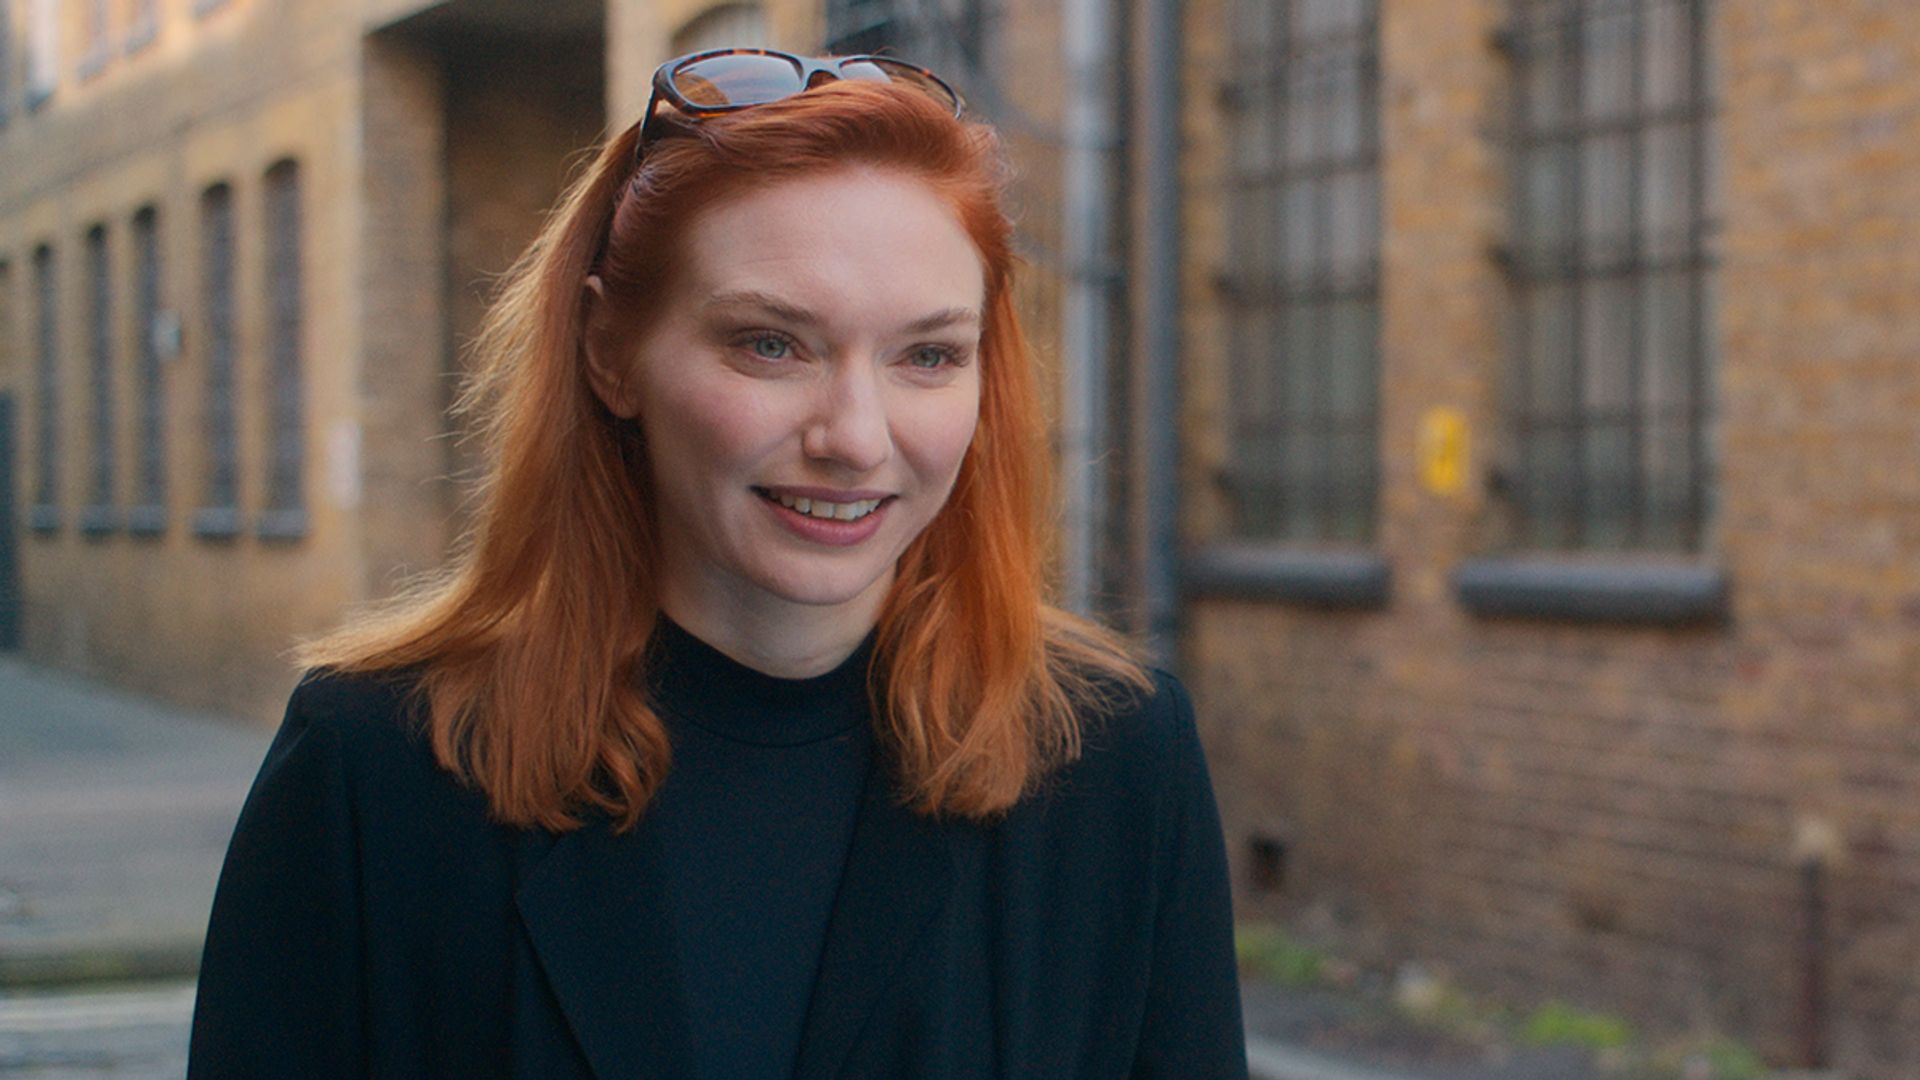 One Day star Eleanor Tomlinson has a famous family: from singer mum to actor brother